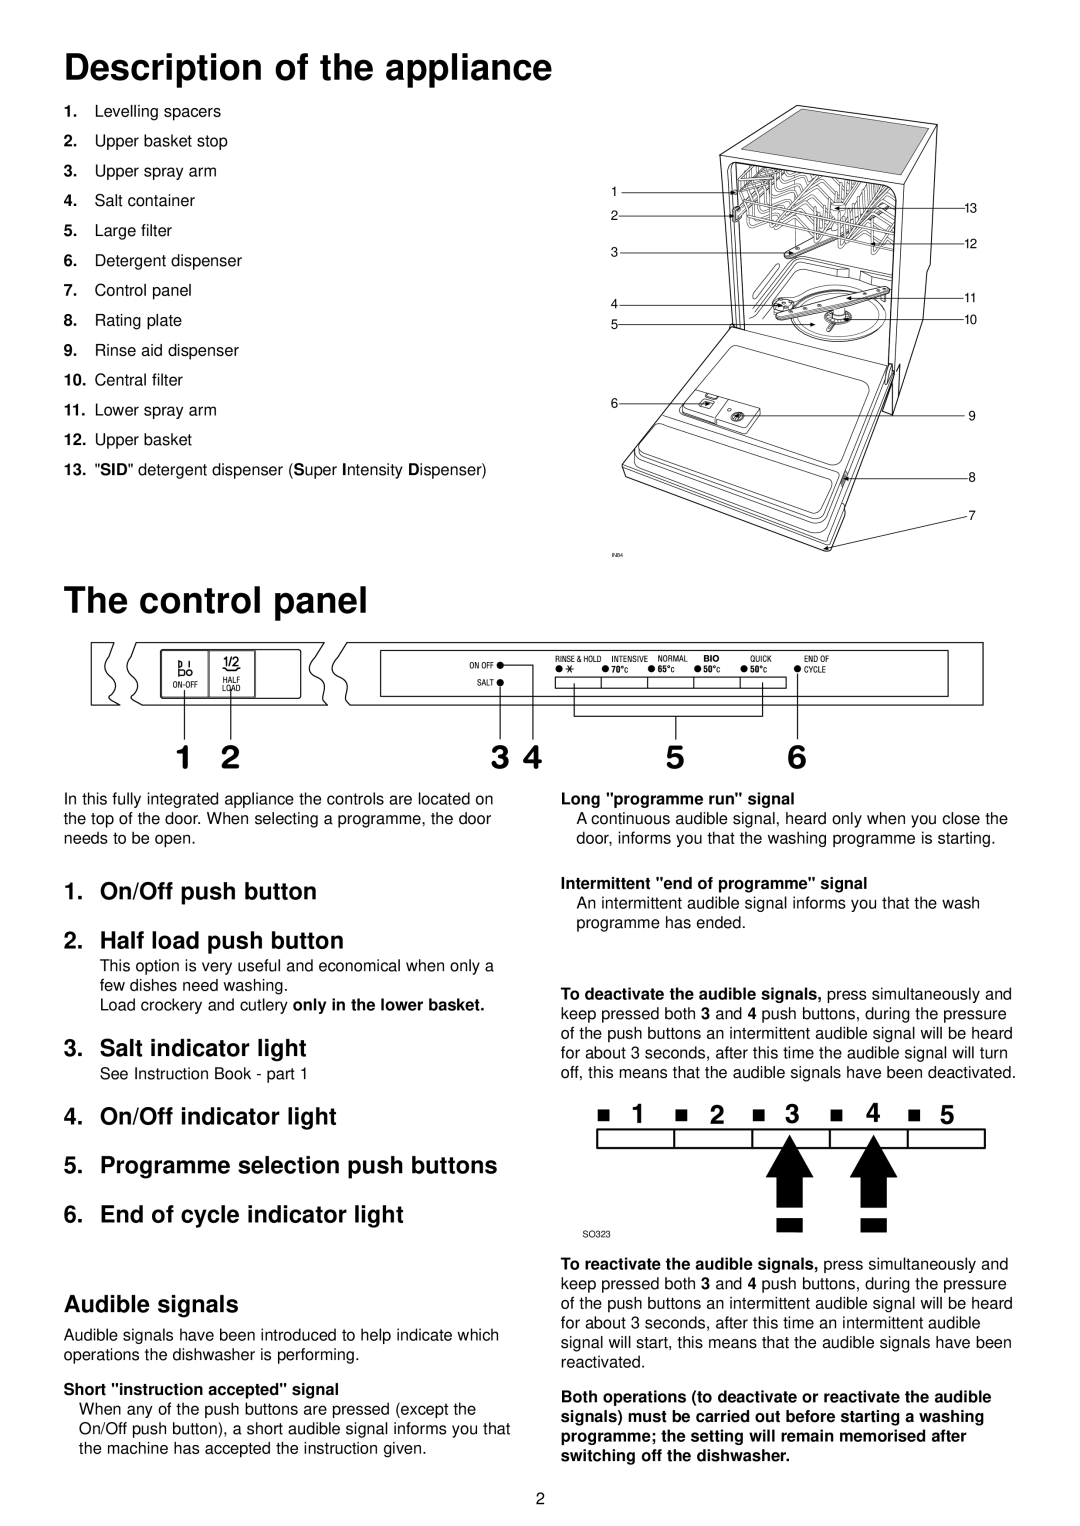 Zanussi ZDT 6253 manual Description of the appliance, The control panel, 1.On/Off push button 2.Half load push button 